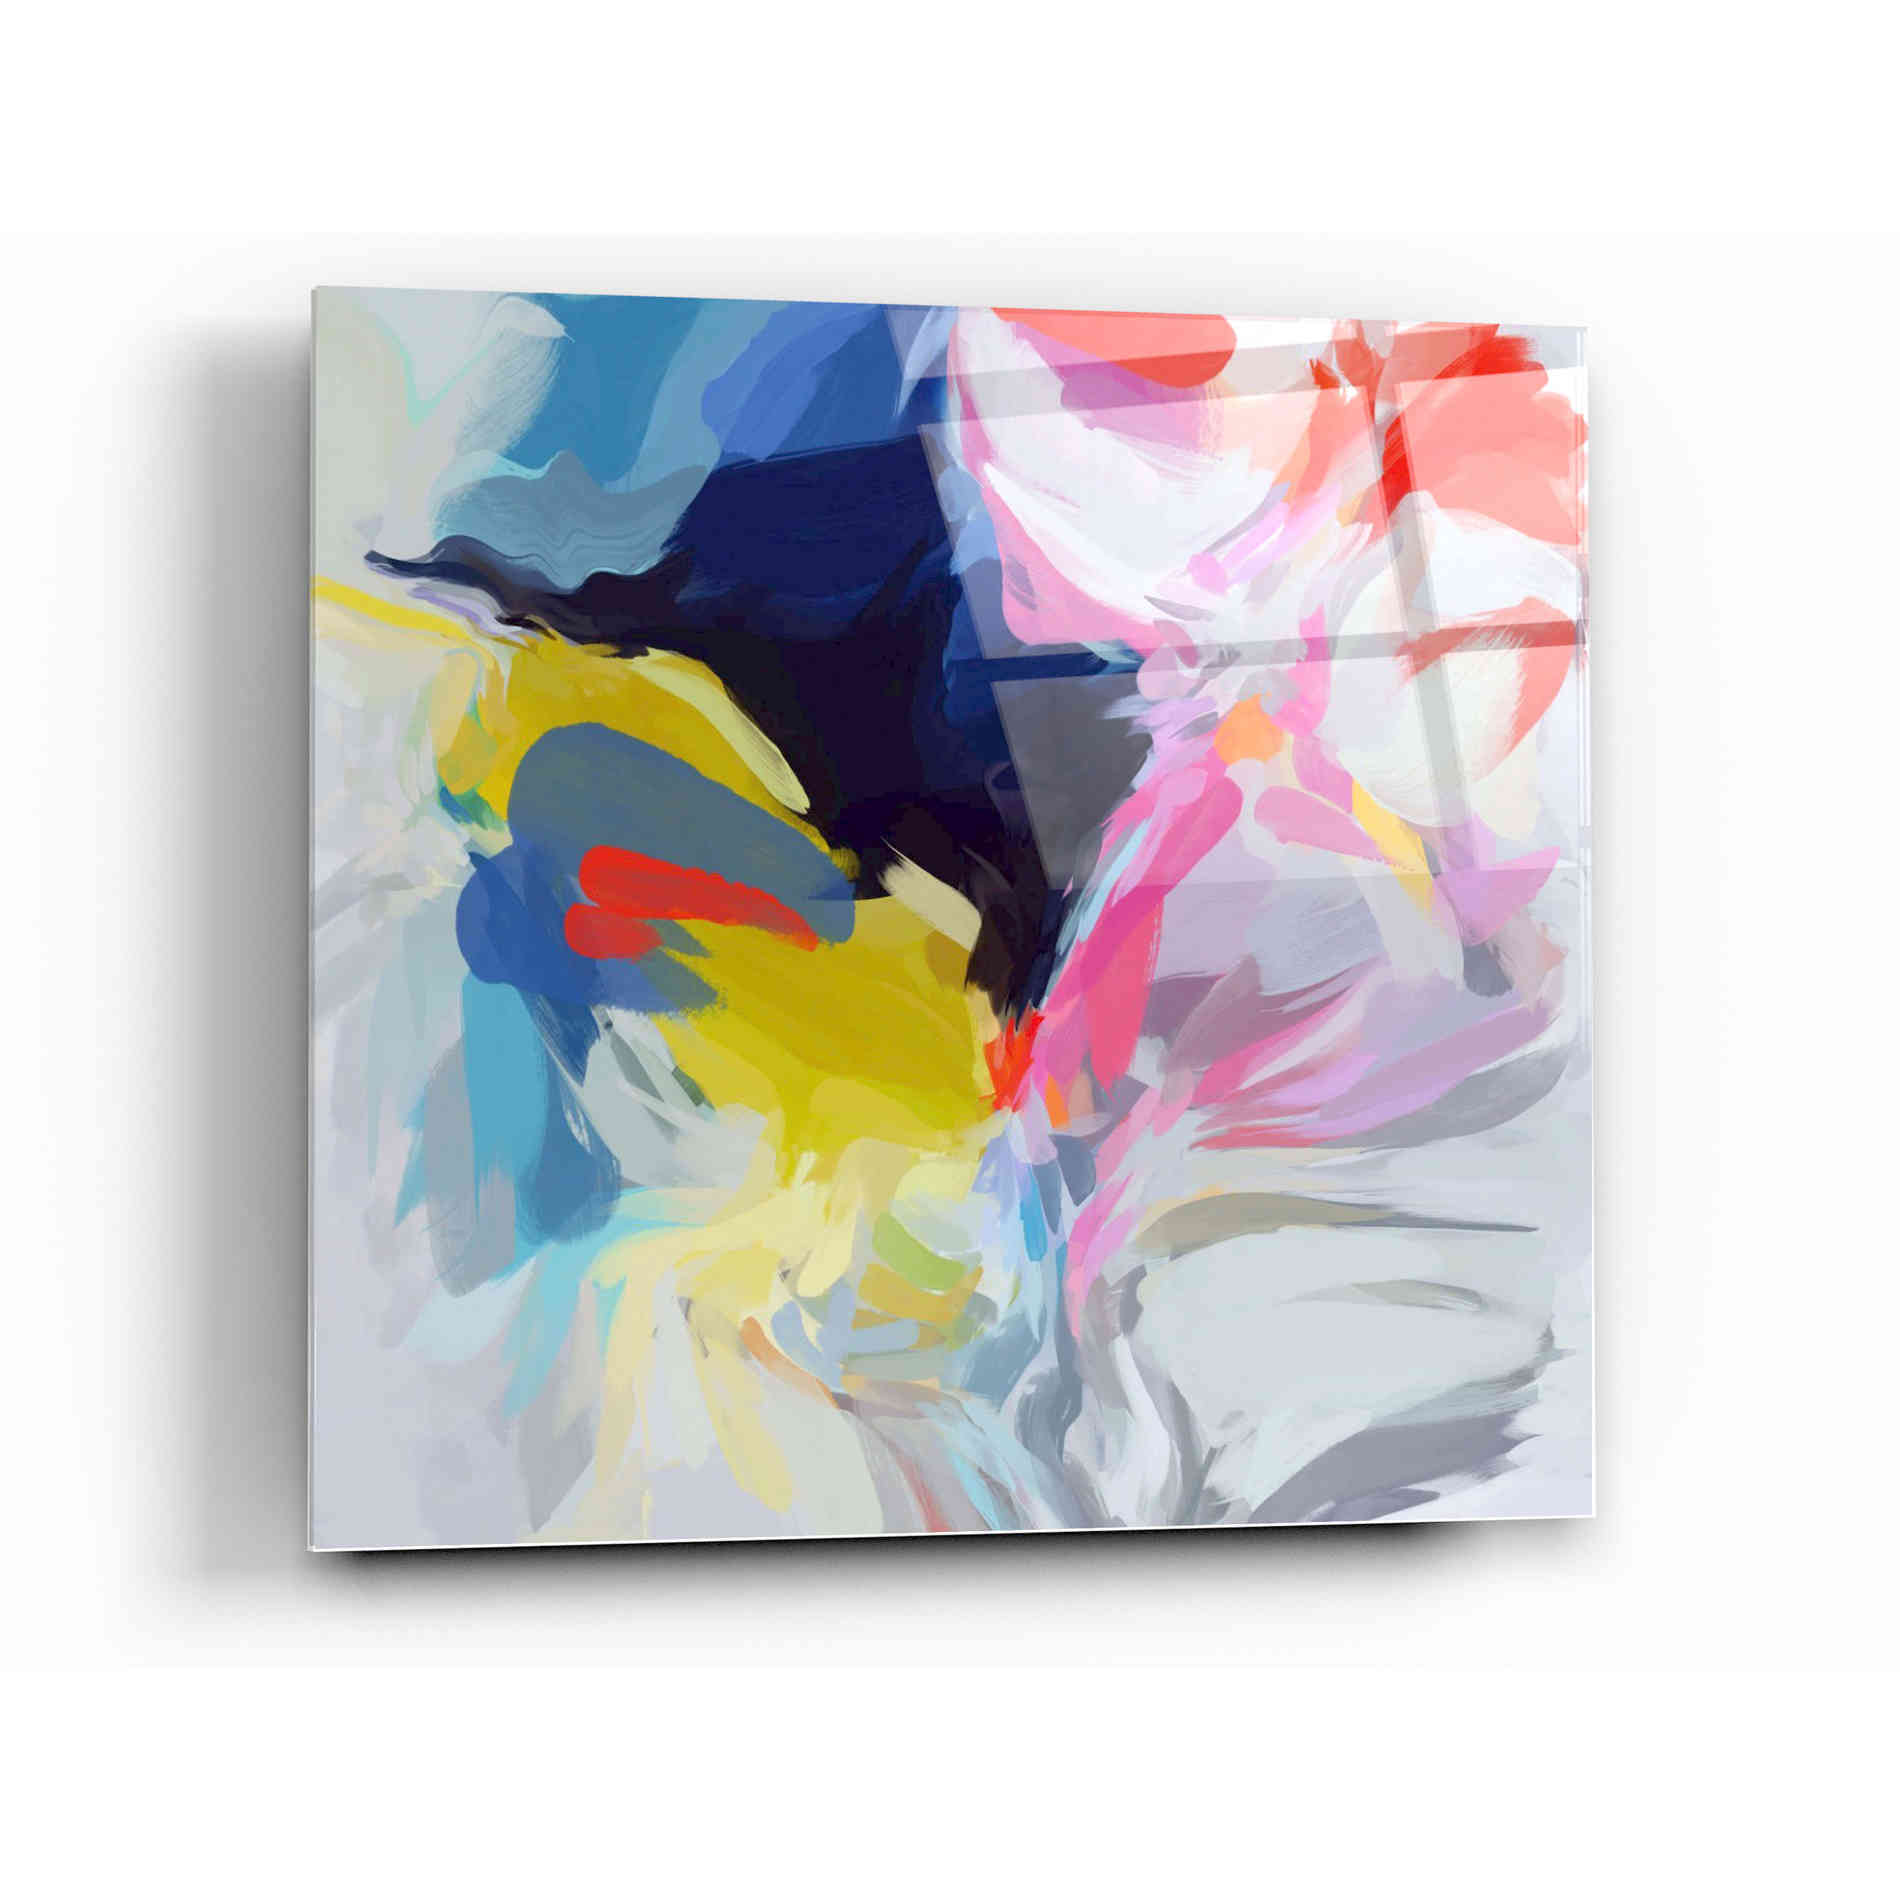 Epic Art 'Divine Potential 3' by Irena Orlov, Acrylic Glass Wall Art,12x12